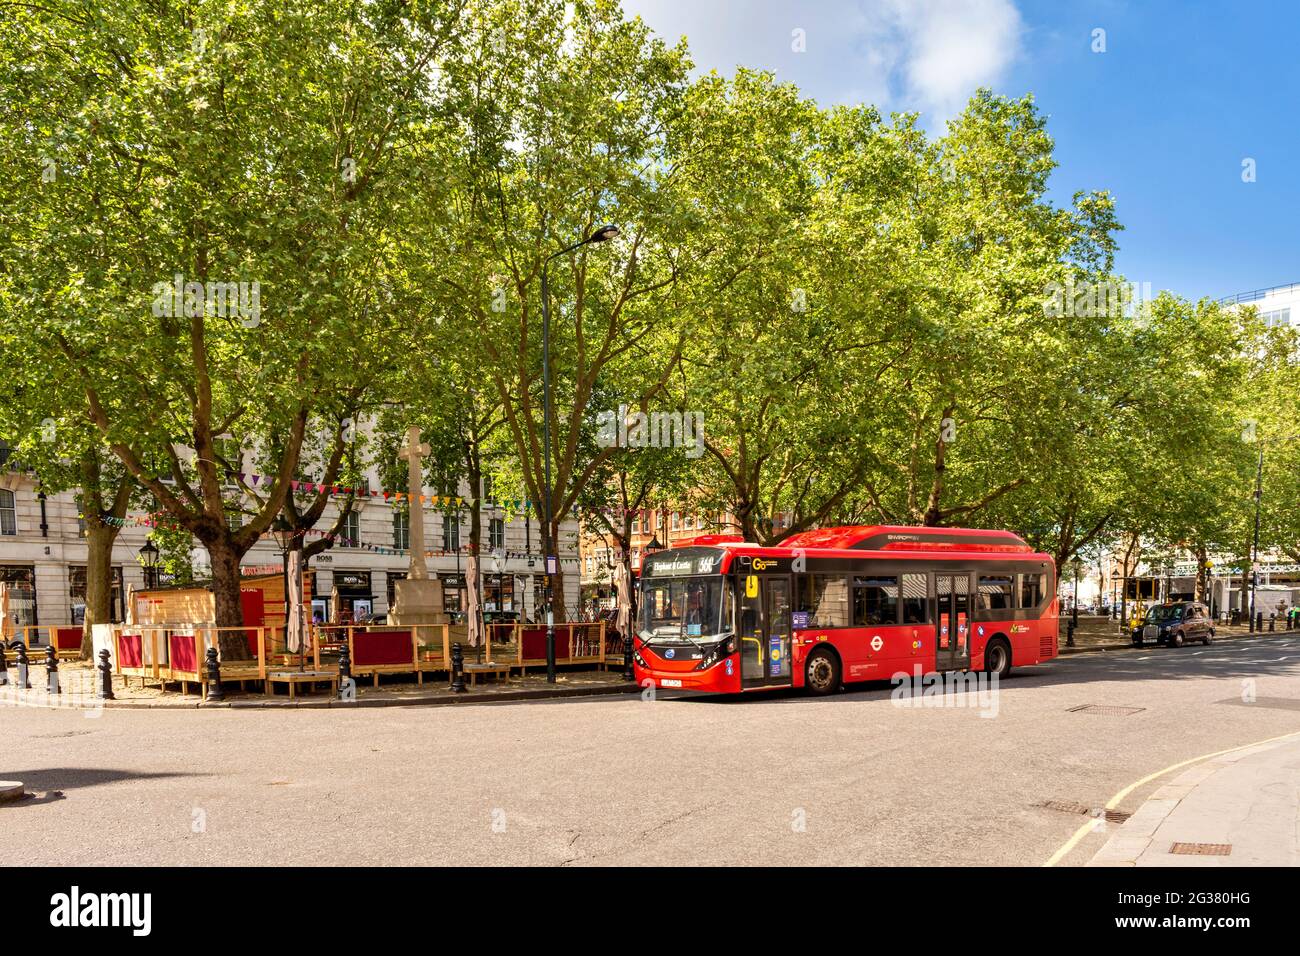 LONDON ENGLAND SLOANE SQUARE CHELSEA AND A RED BUS IN EARLY SUMMER Stock Photo